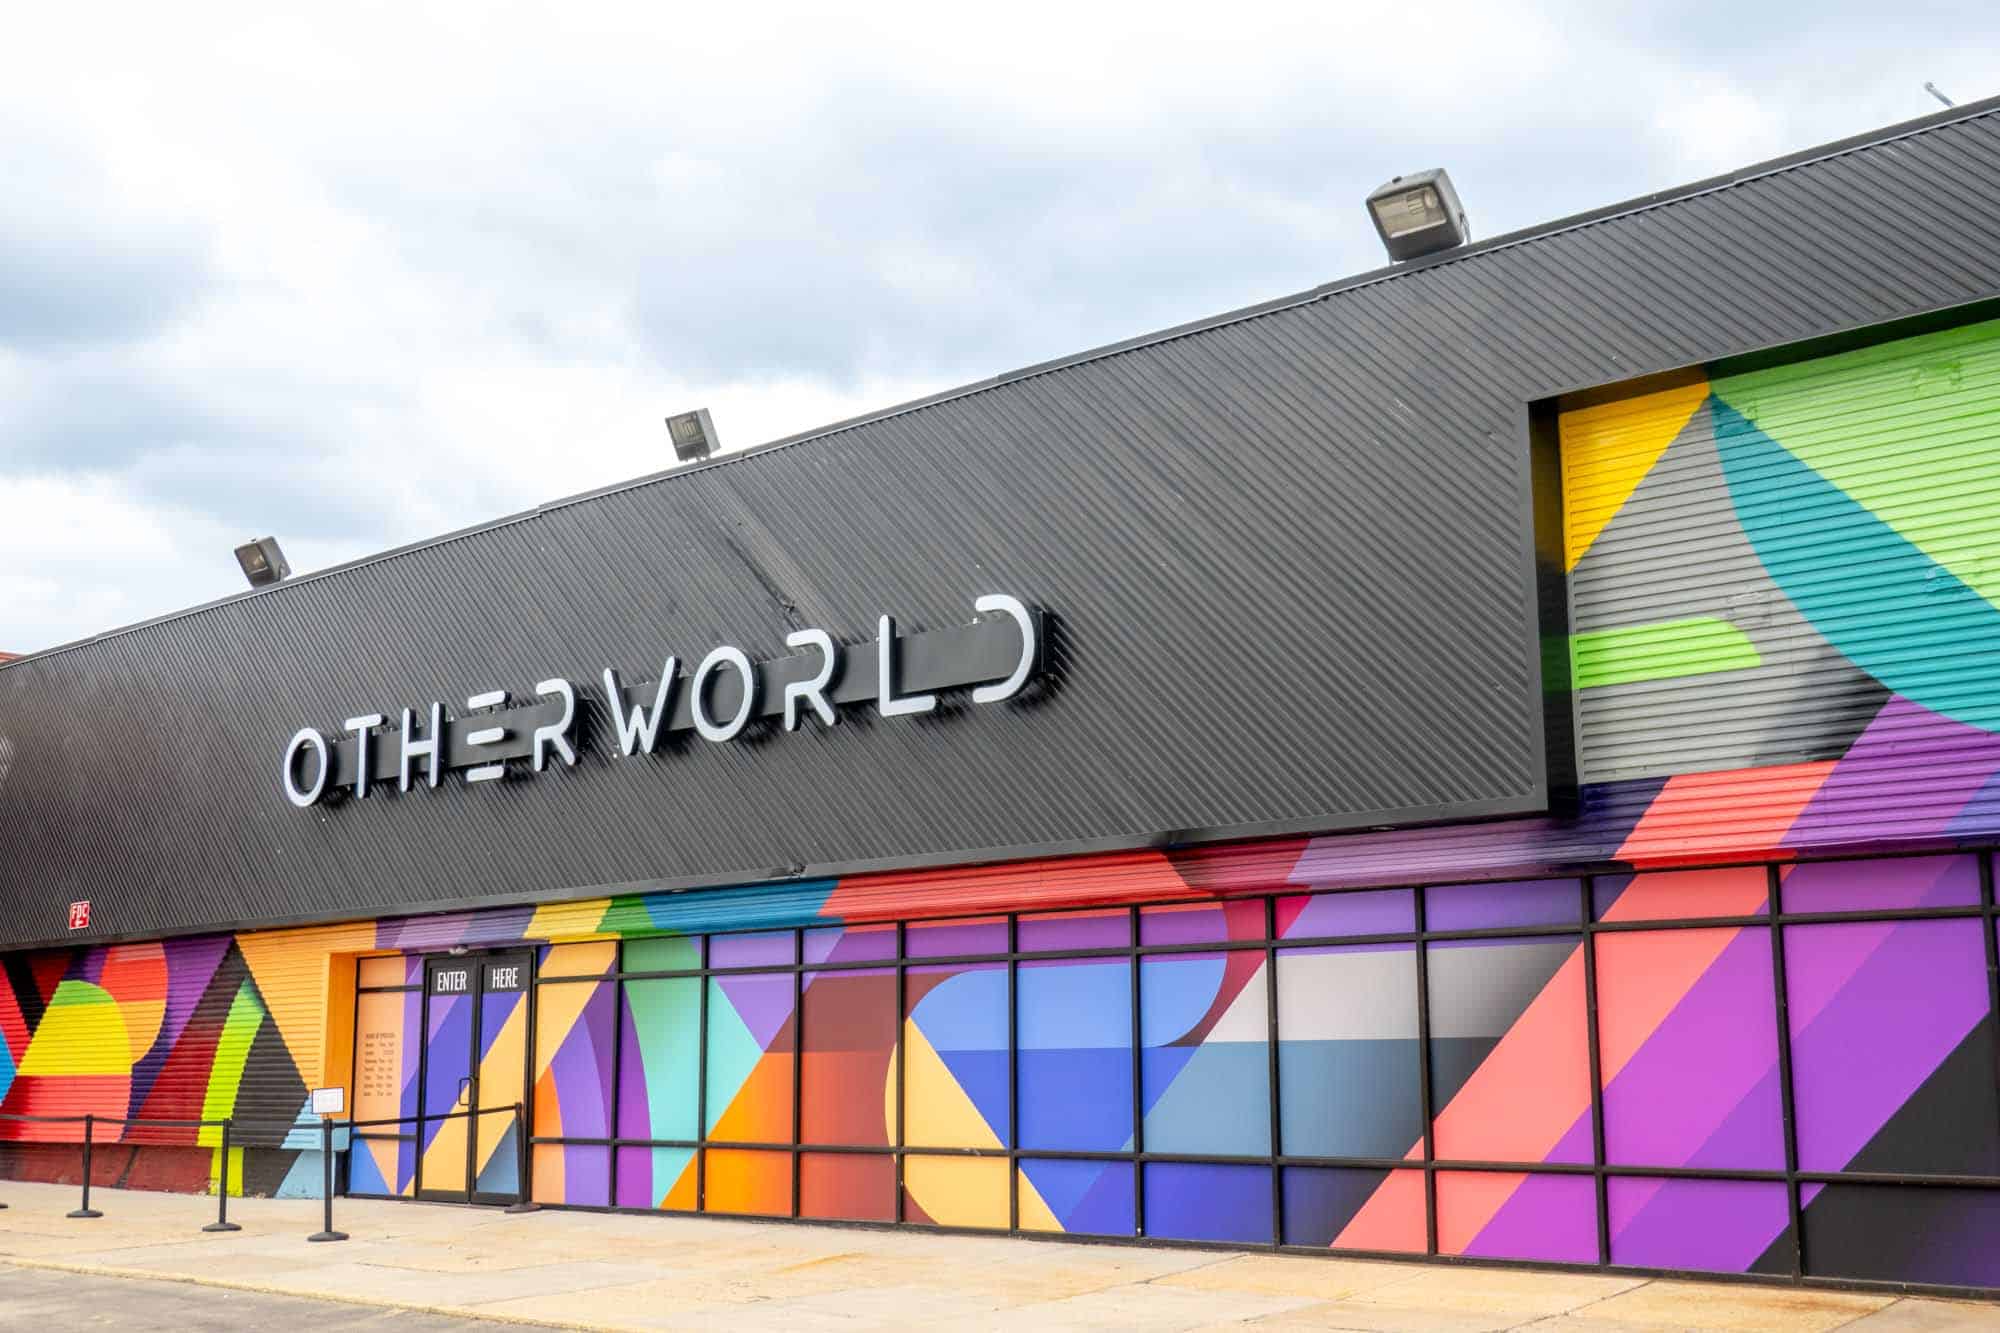 Geometric shapes in all the colors of the rainbow under a sign that reads "Otherworld"